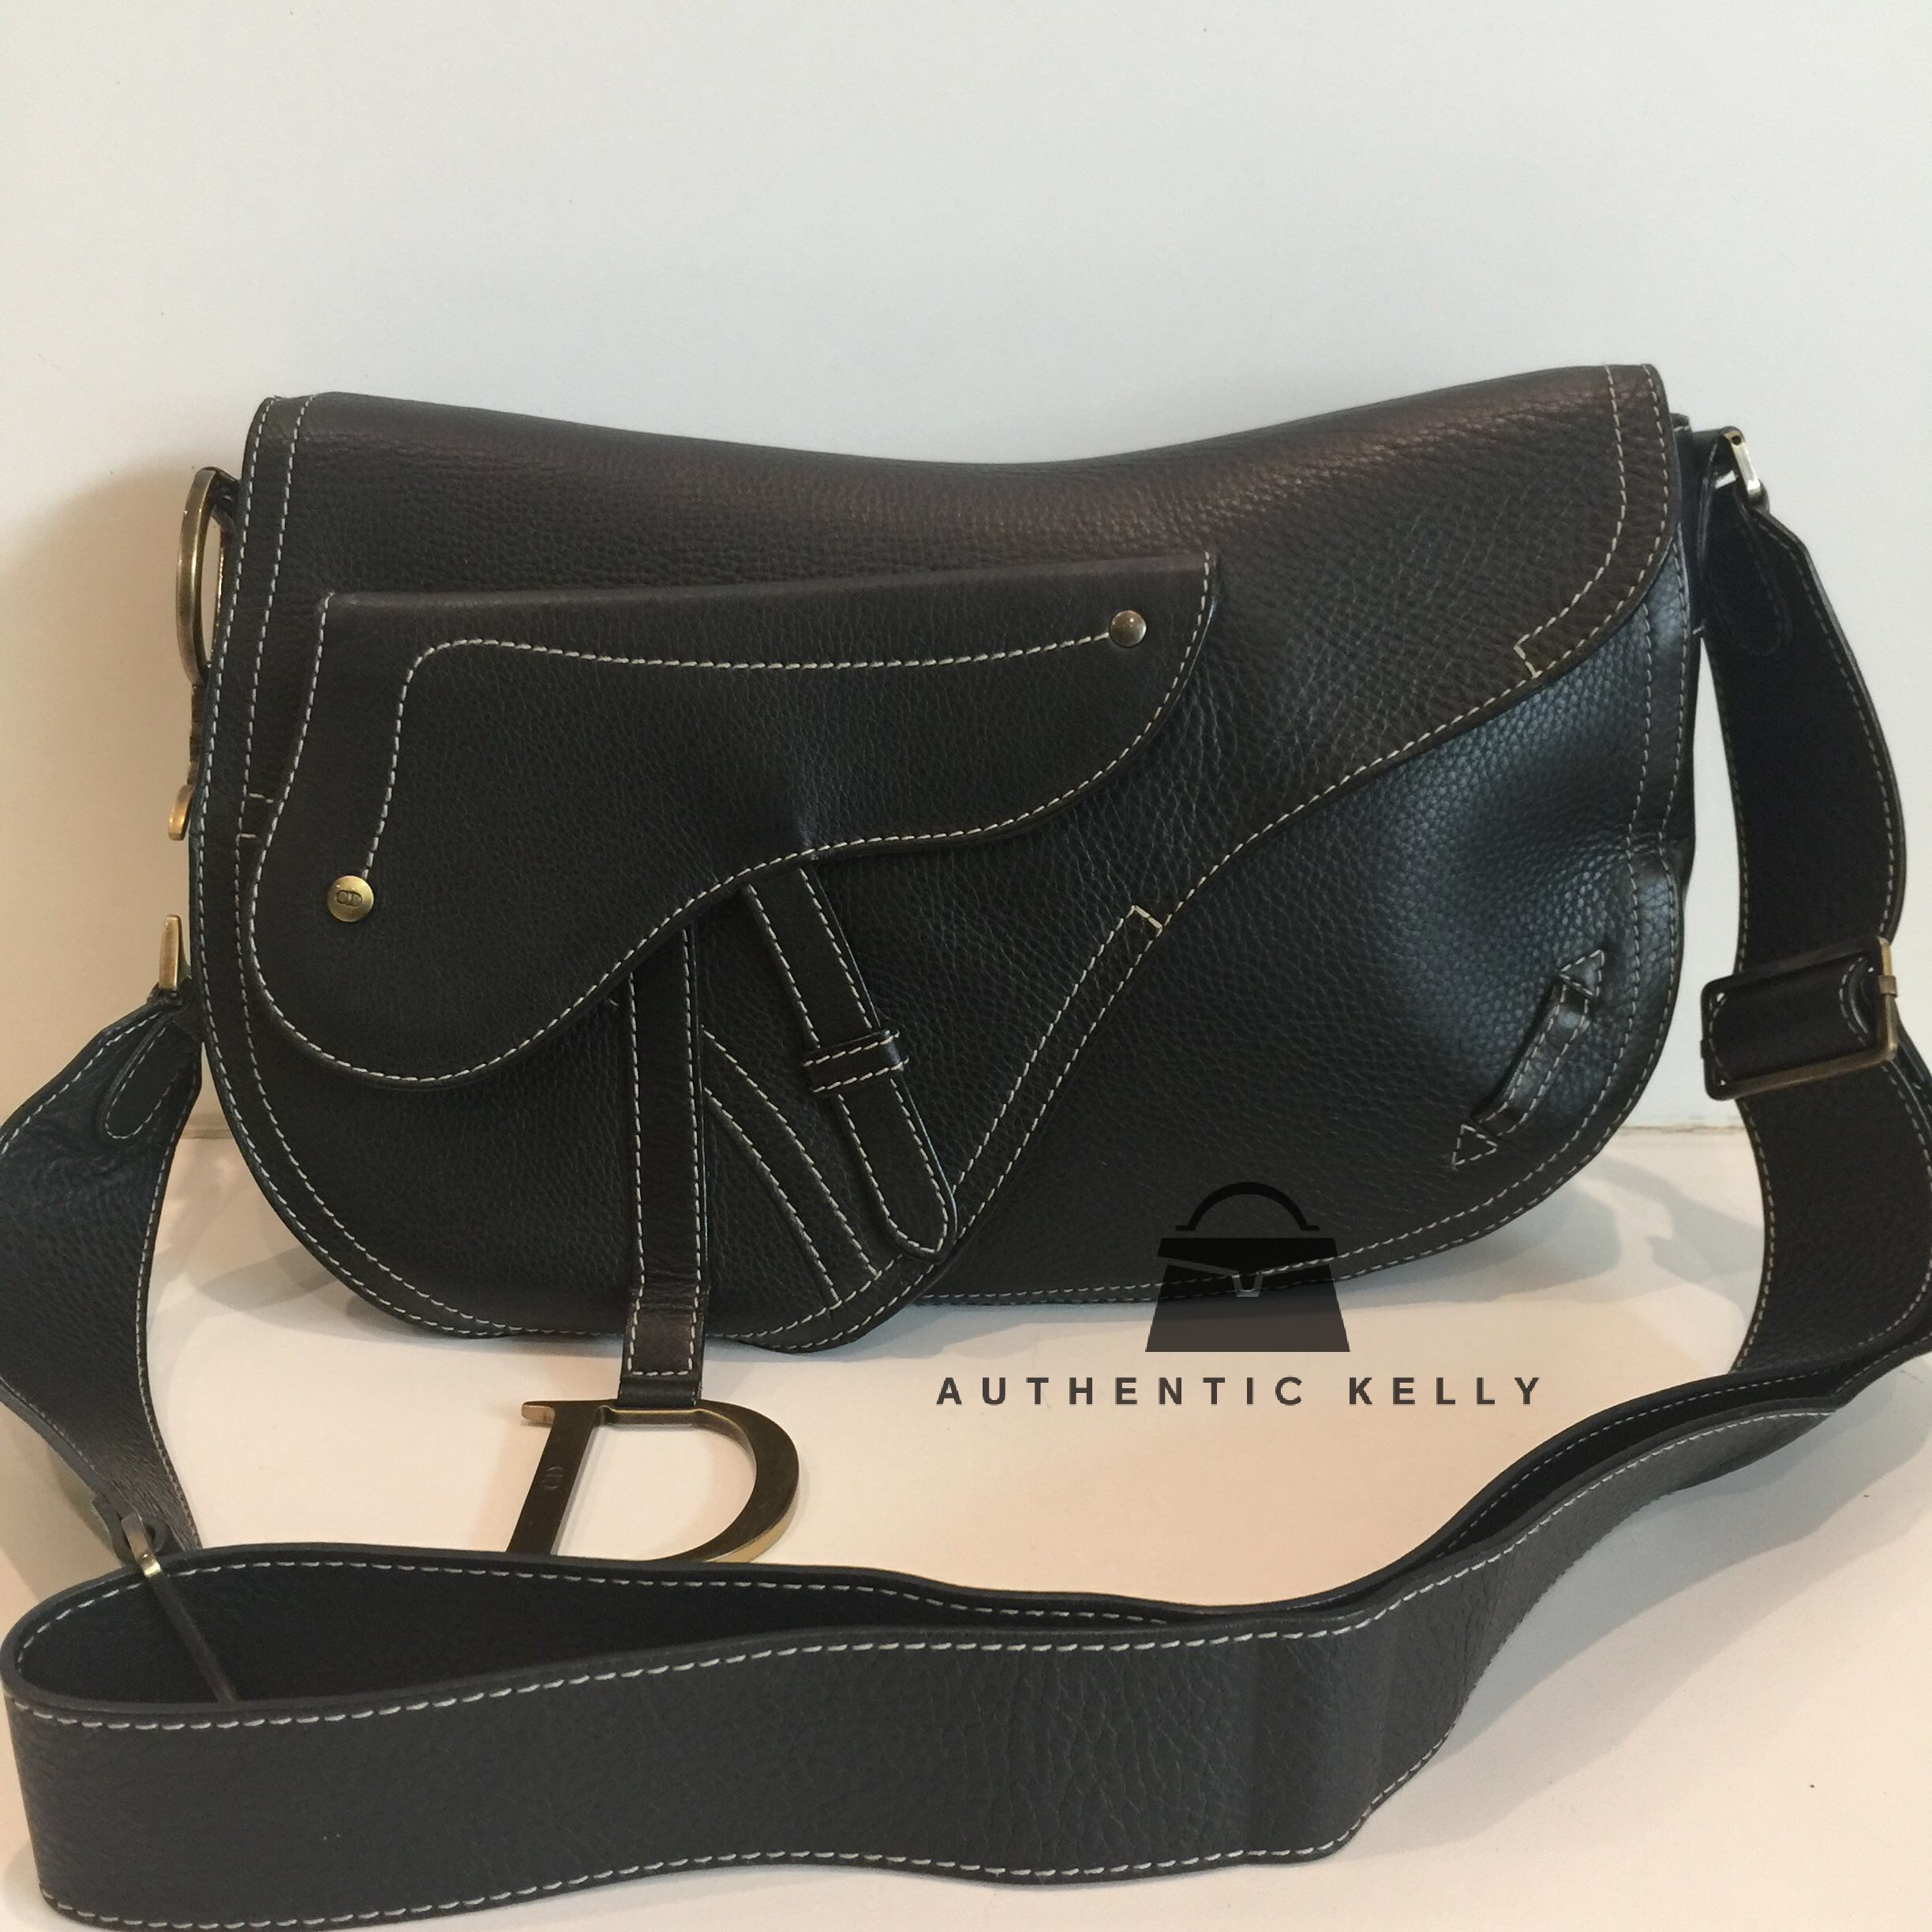 CHRISTIAN DIOR Black Leather Crossbody Saddle Bag – AuthenticKelly